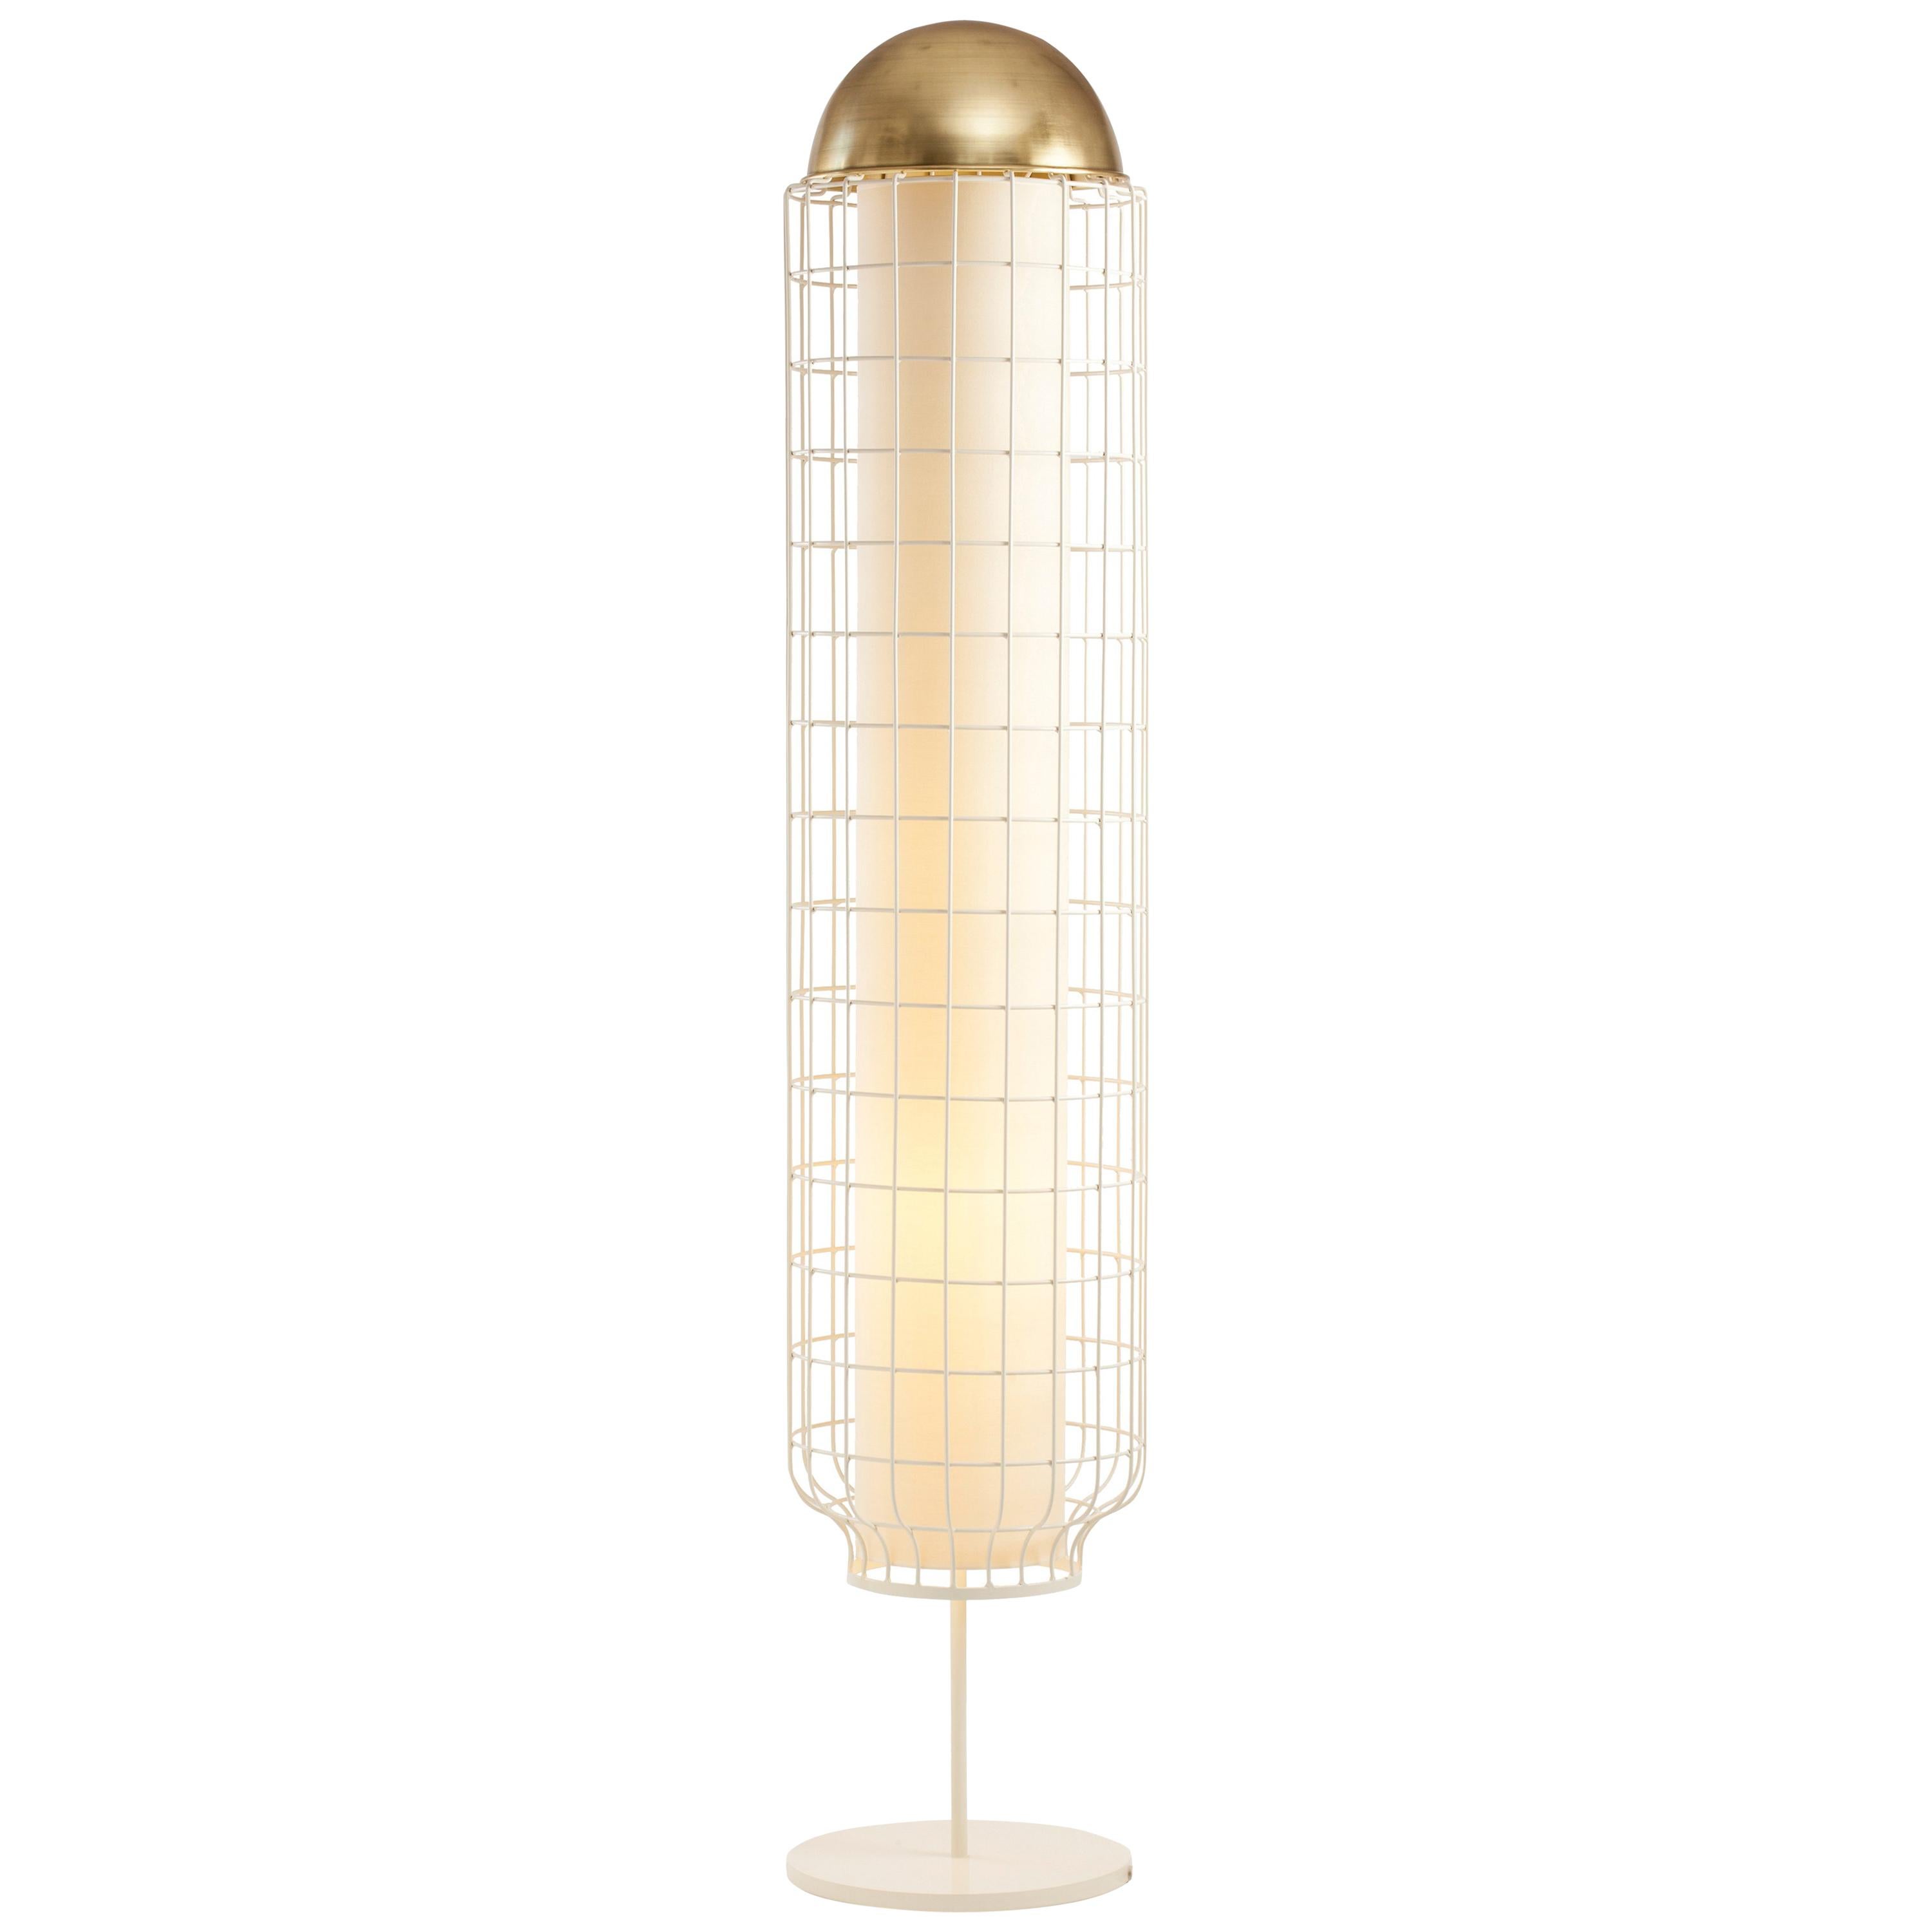 21st Century Art Deco Magnolia Floor Lamp Ivory and Polished Brass